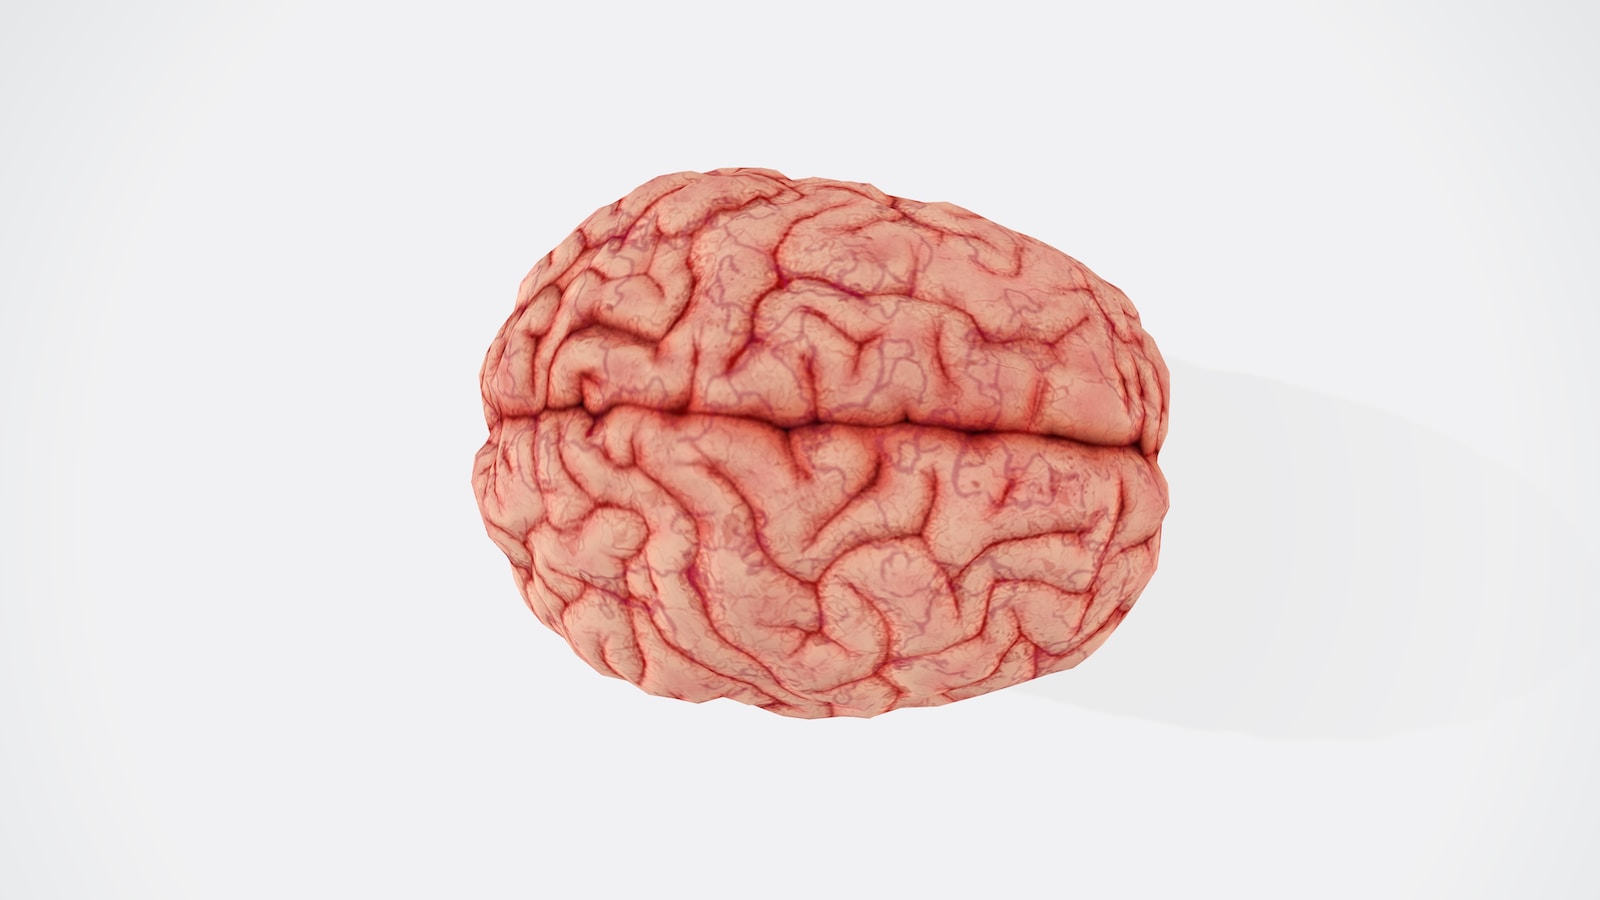 a close up of a human brain on a white background